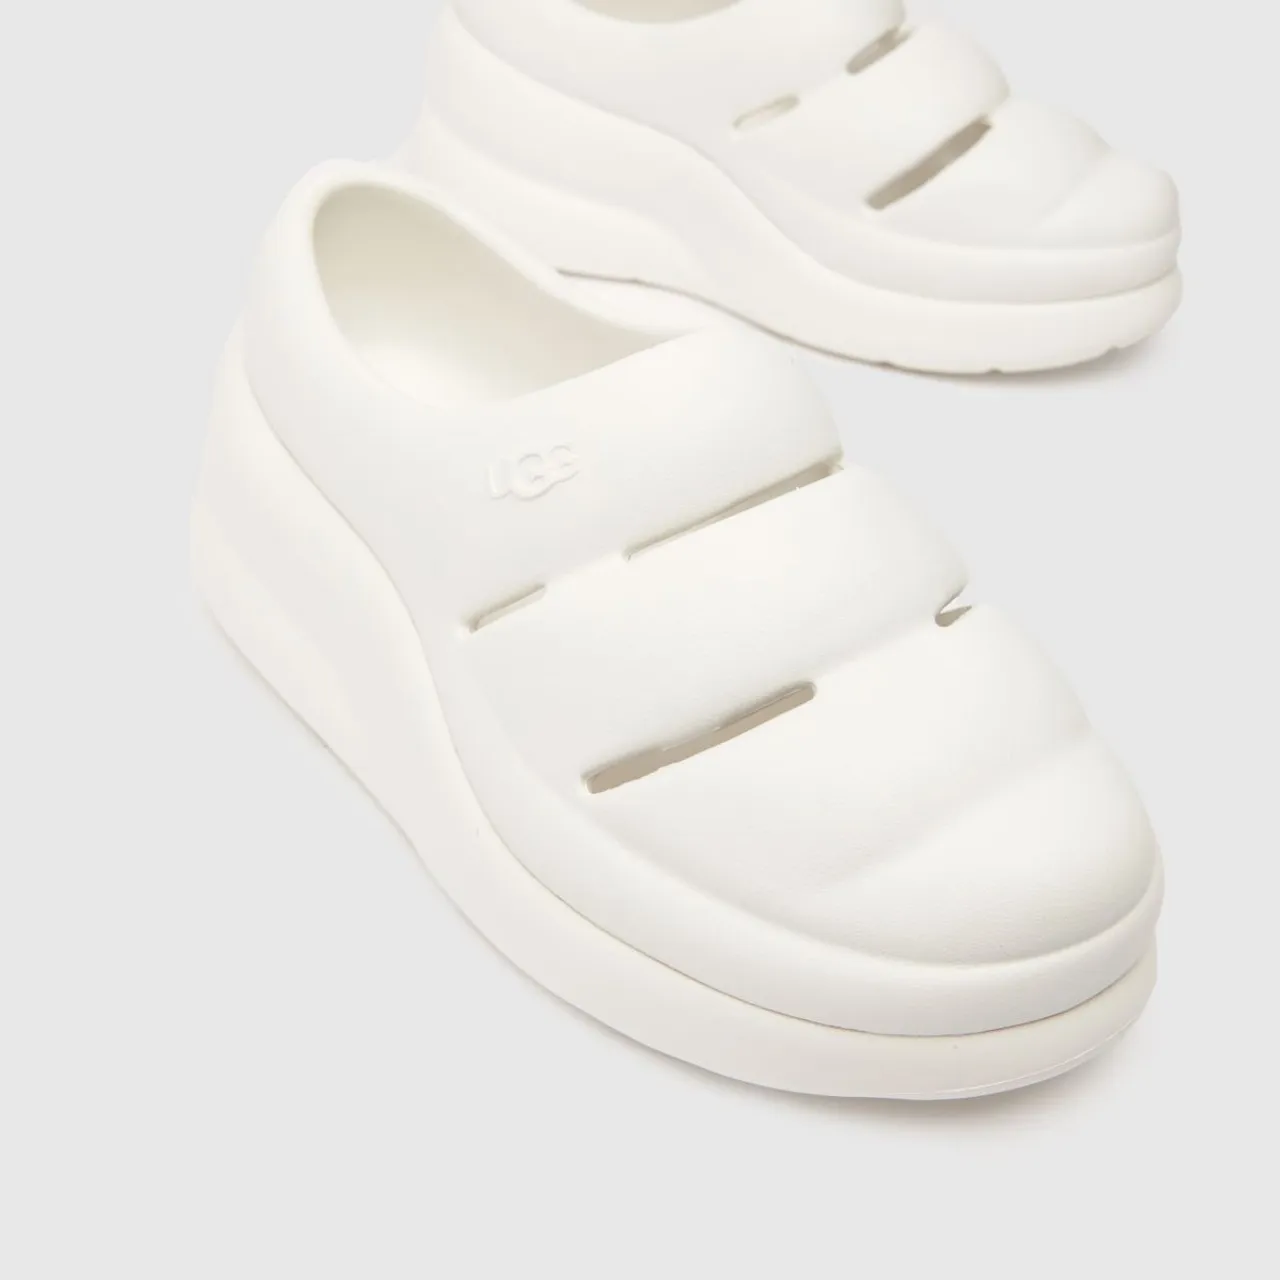 Ugg Sport Yeah Clog Sandals In White